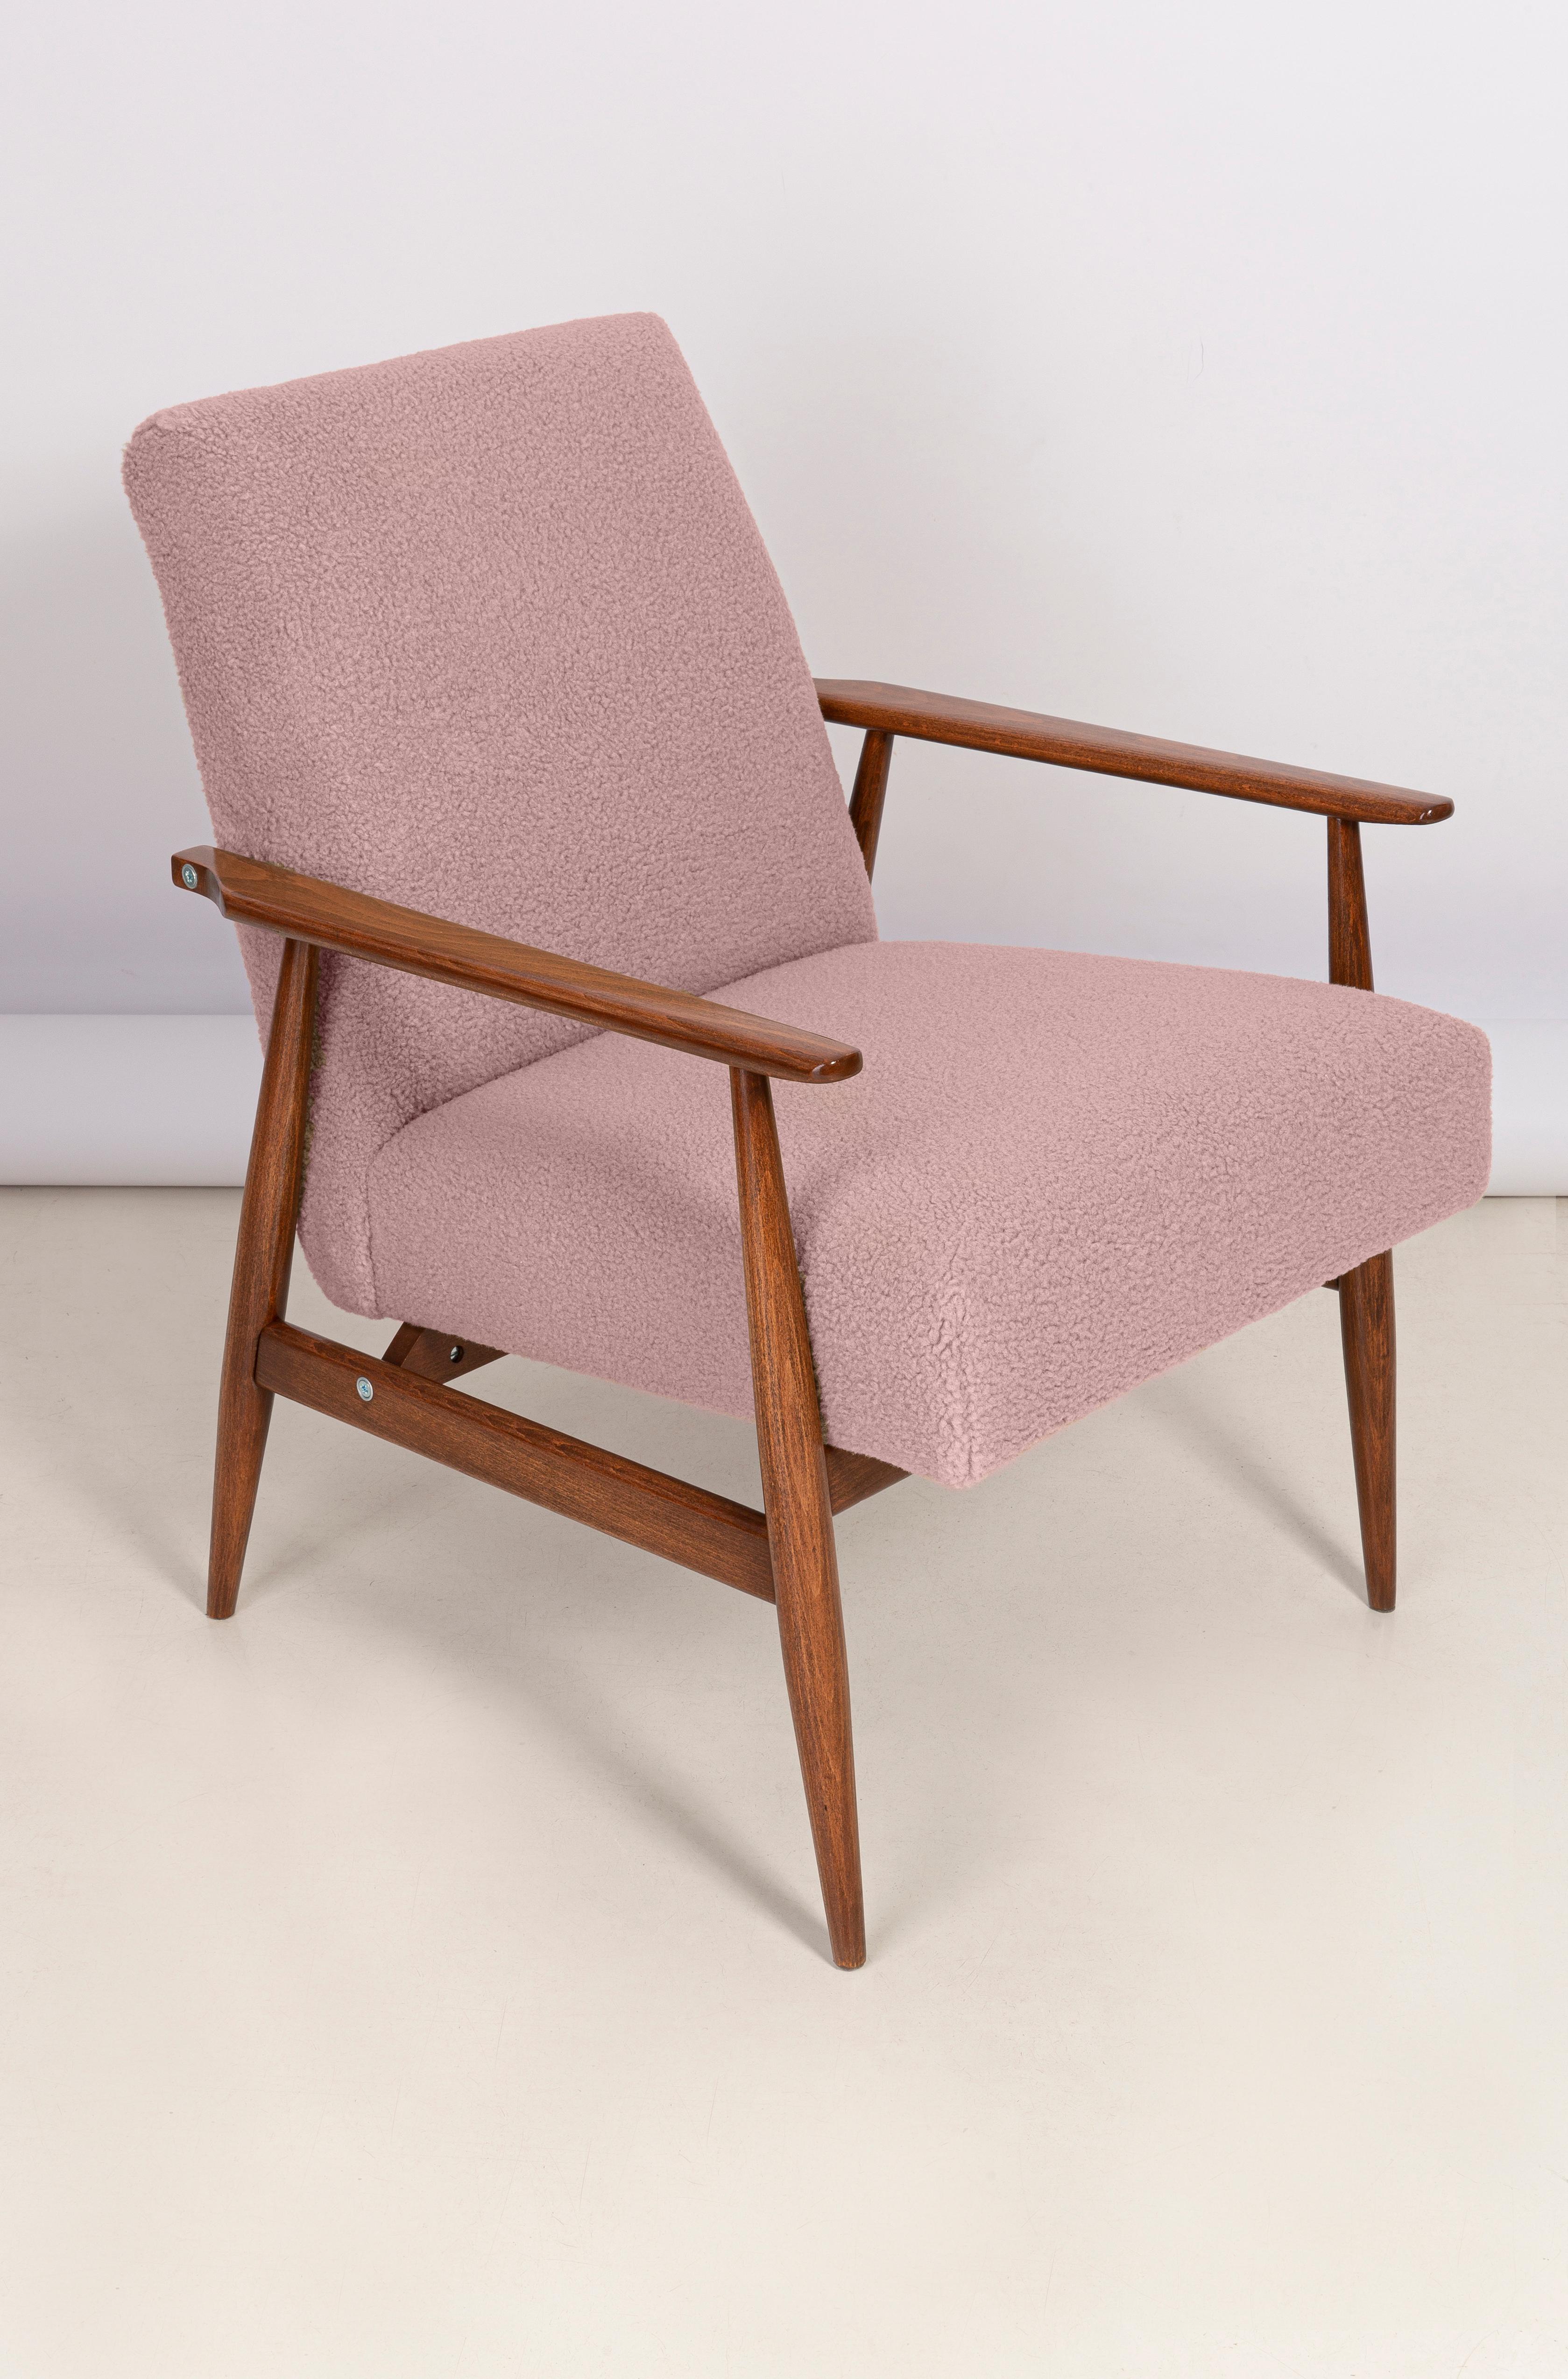 Pair of Dusty Pink Bouclé Dante Armchairs, H. Lis, Europe, 1960s For Sale 2